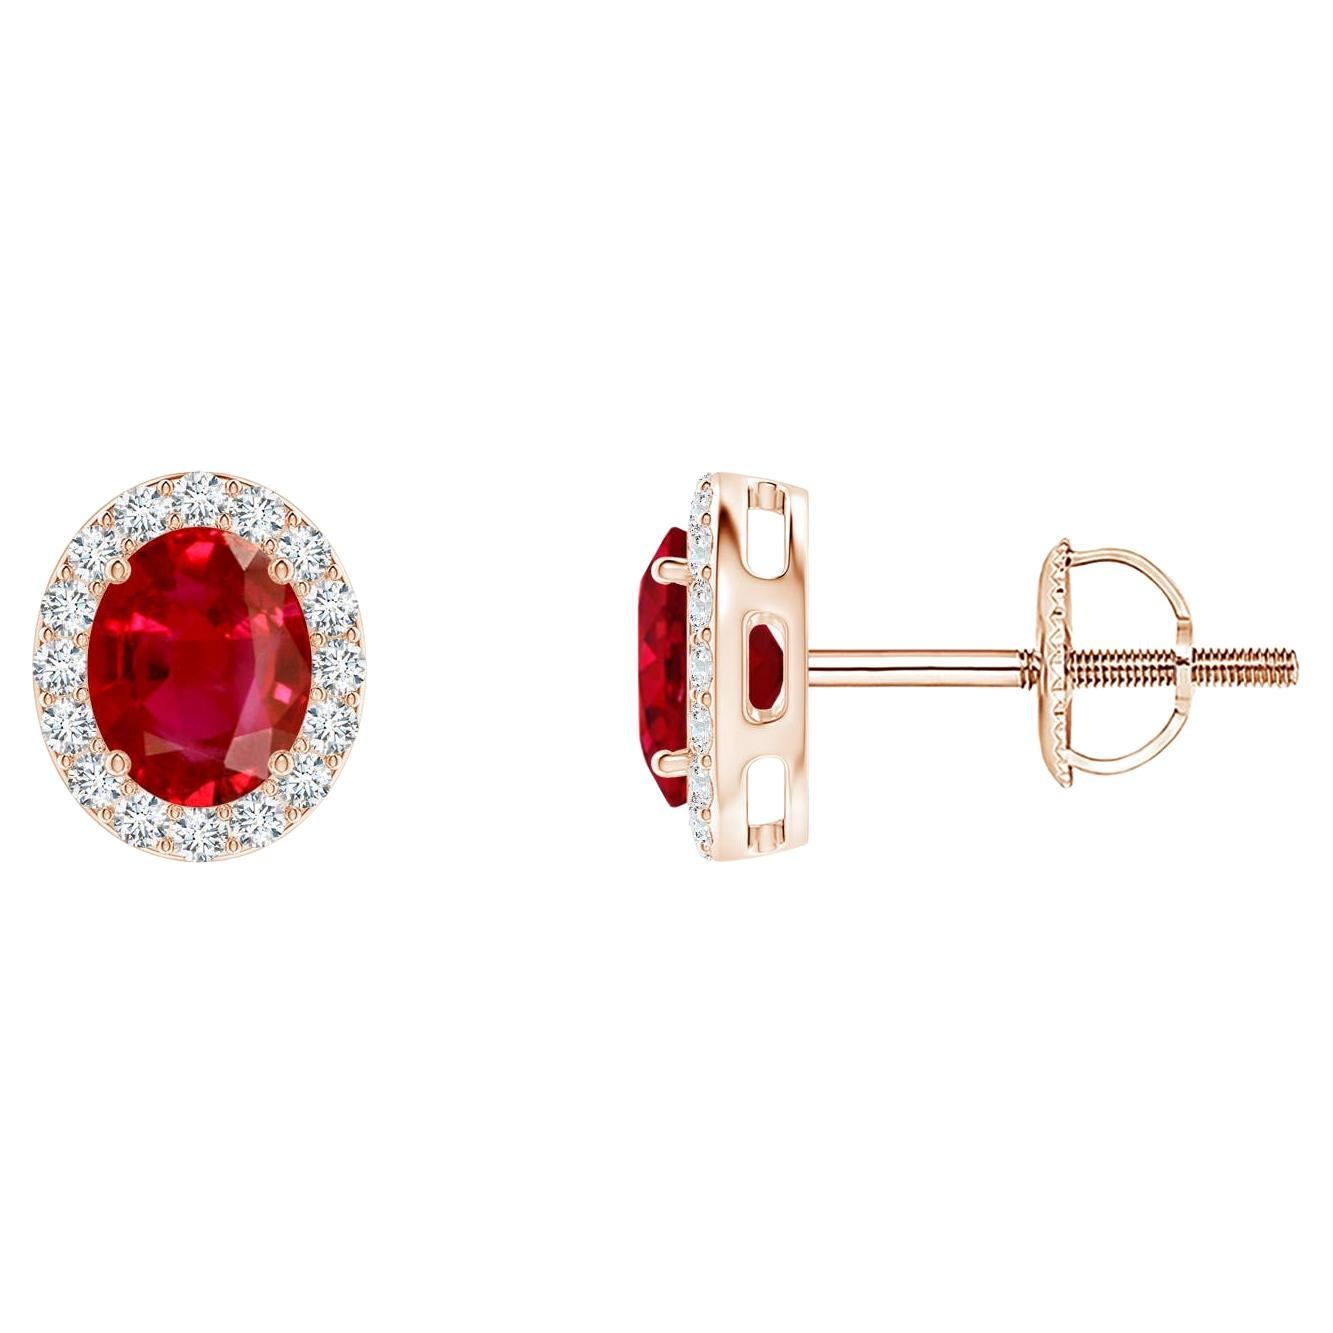 ANGARA Natural Oval 0.80ct Ruby Studs with Diamond Halo in 14K Rose Gold